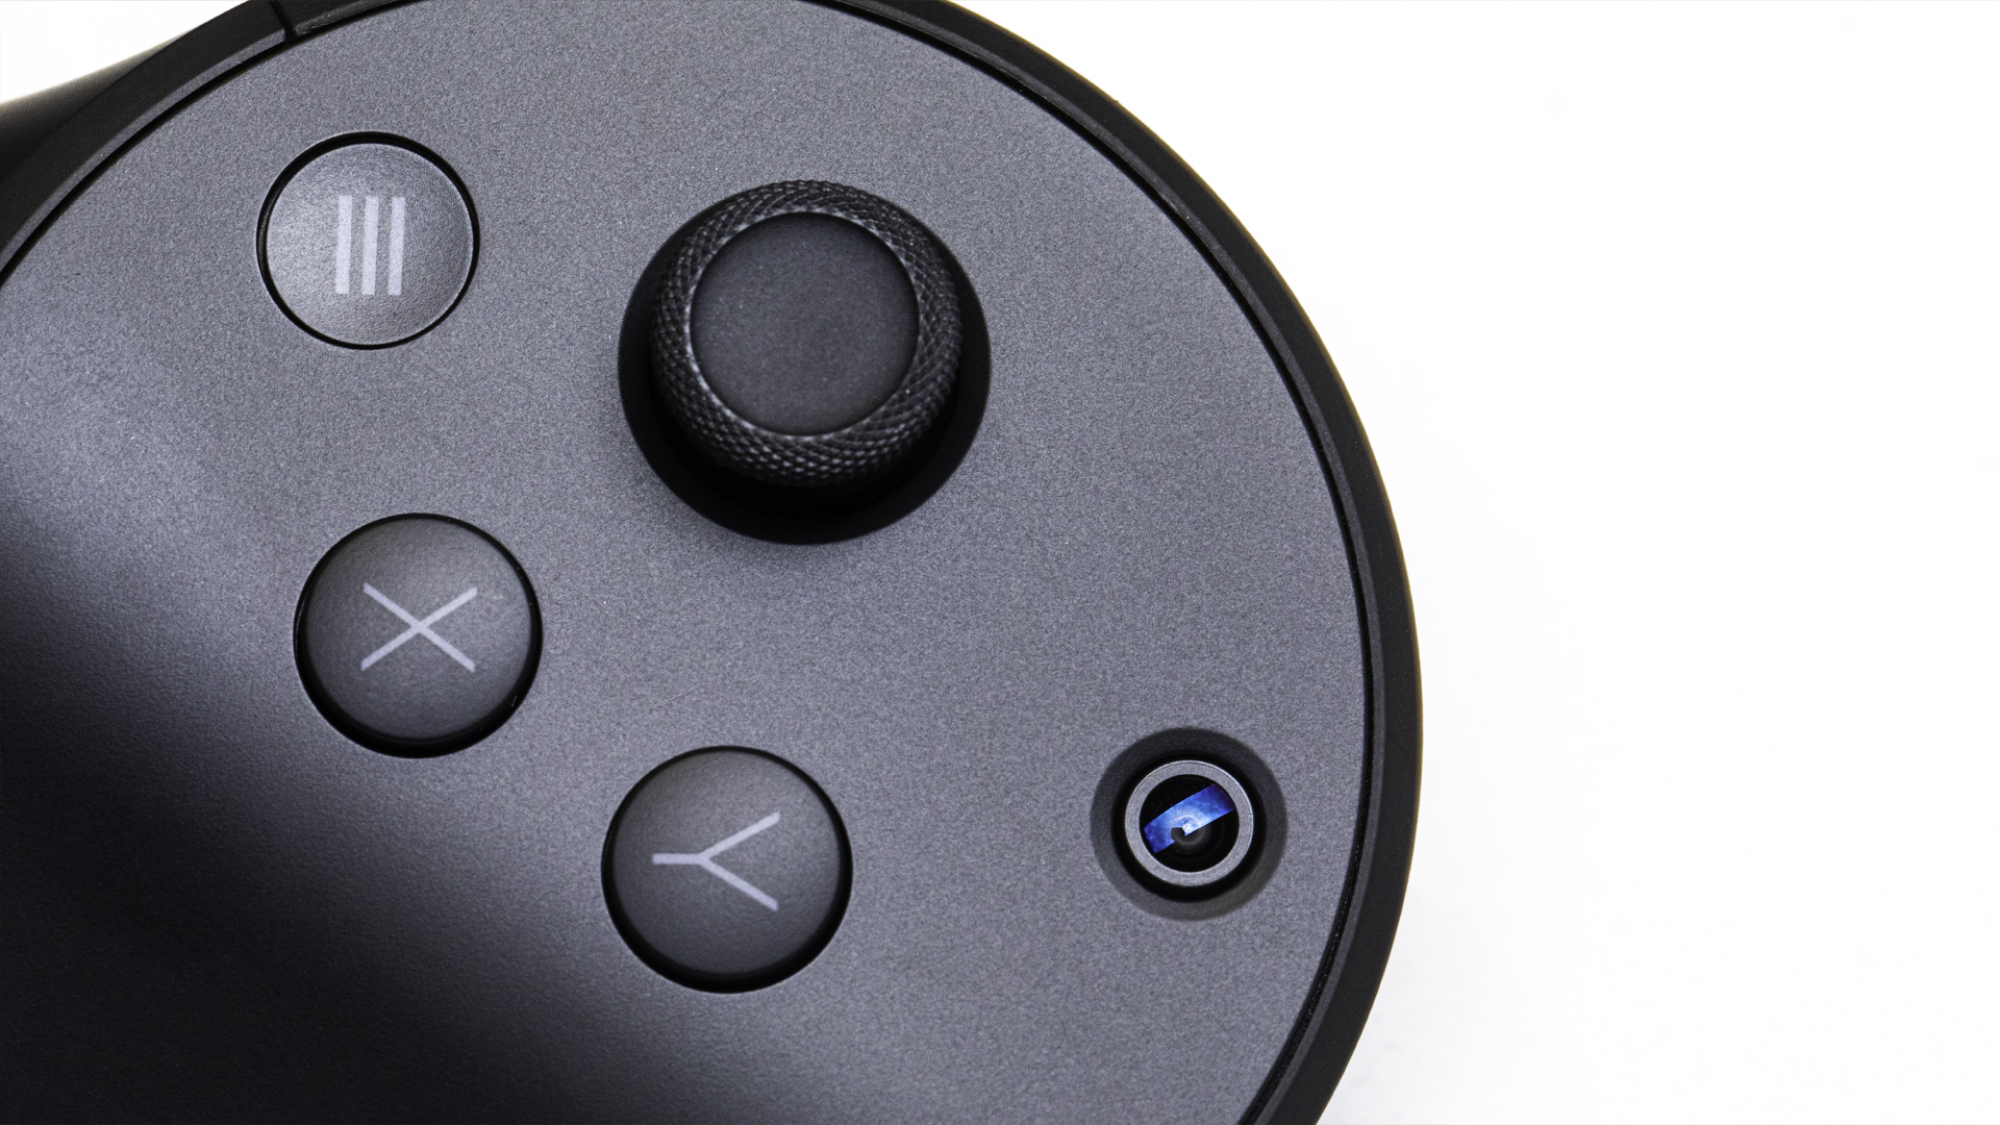 A close up of the face of the controller which is round and houses two round X and Y buttons, a joystick, a menu button and the tiny lens of a camera.